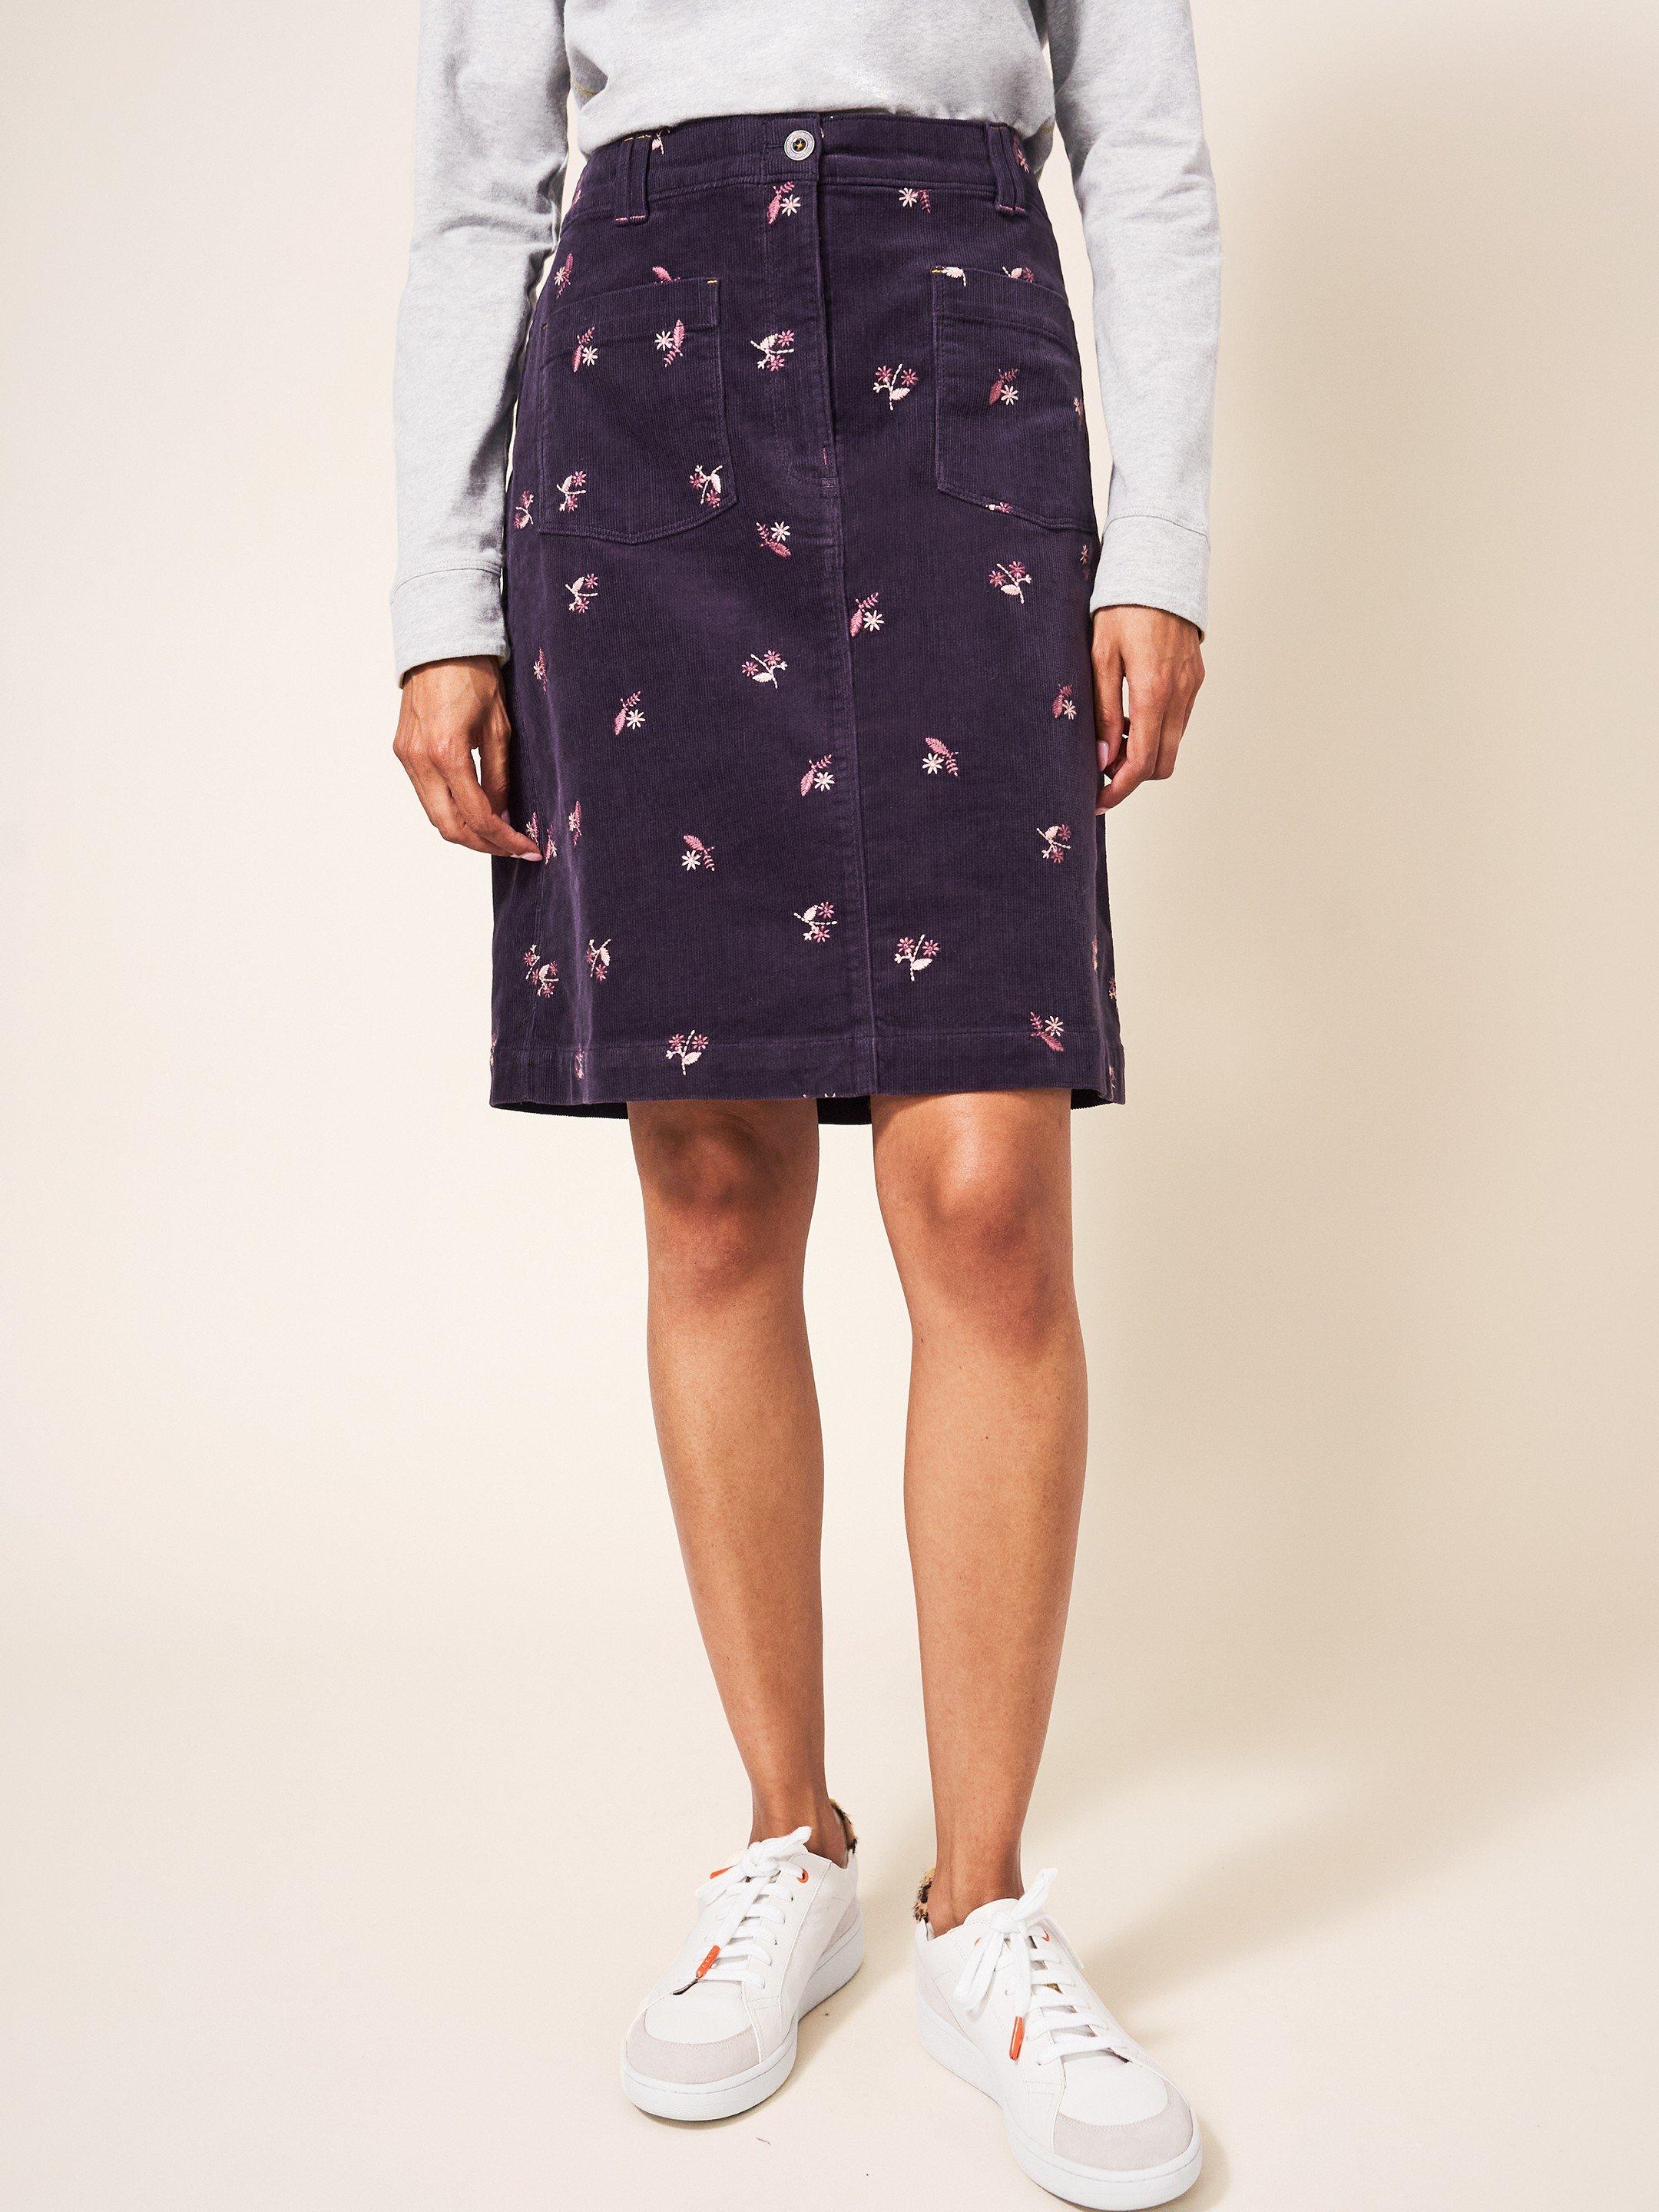 Melody Embroidered Cord Skirt in PURPLE MLT - MODEL FRONT